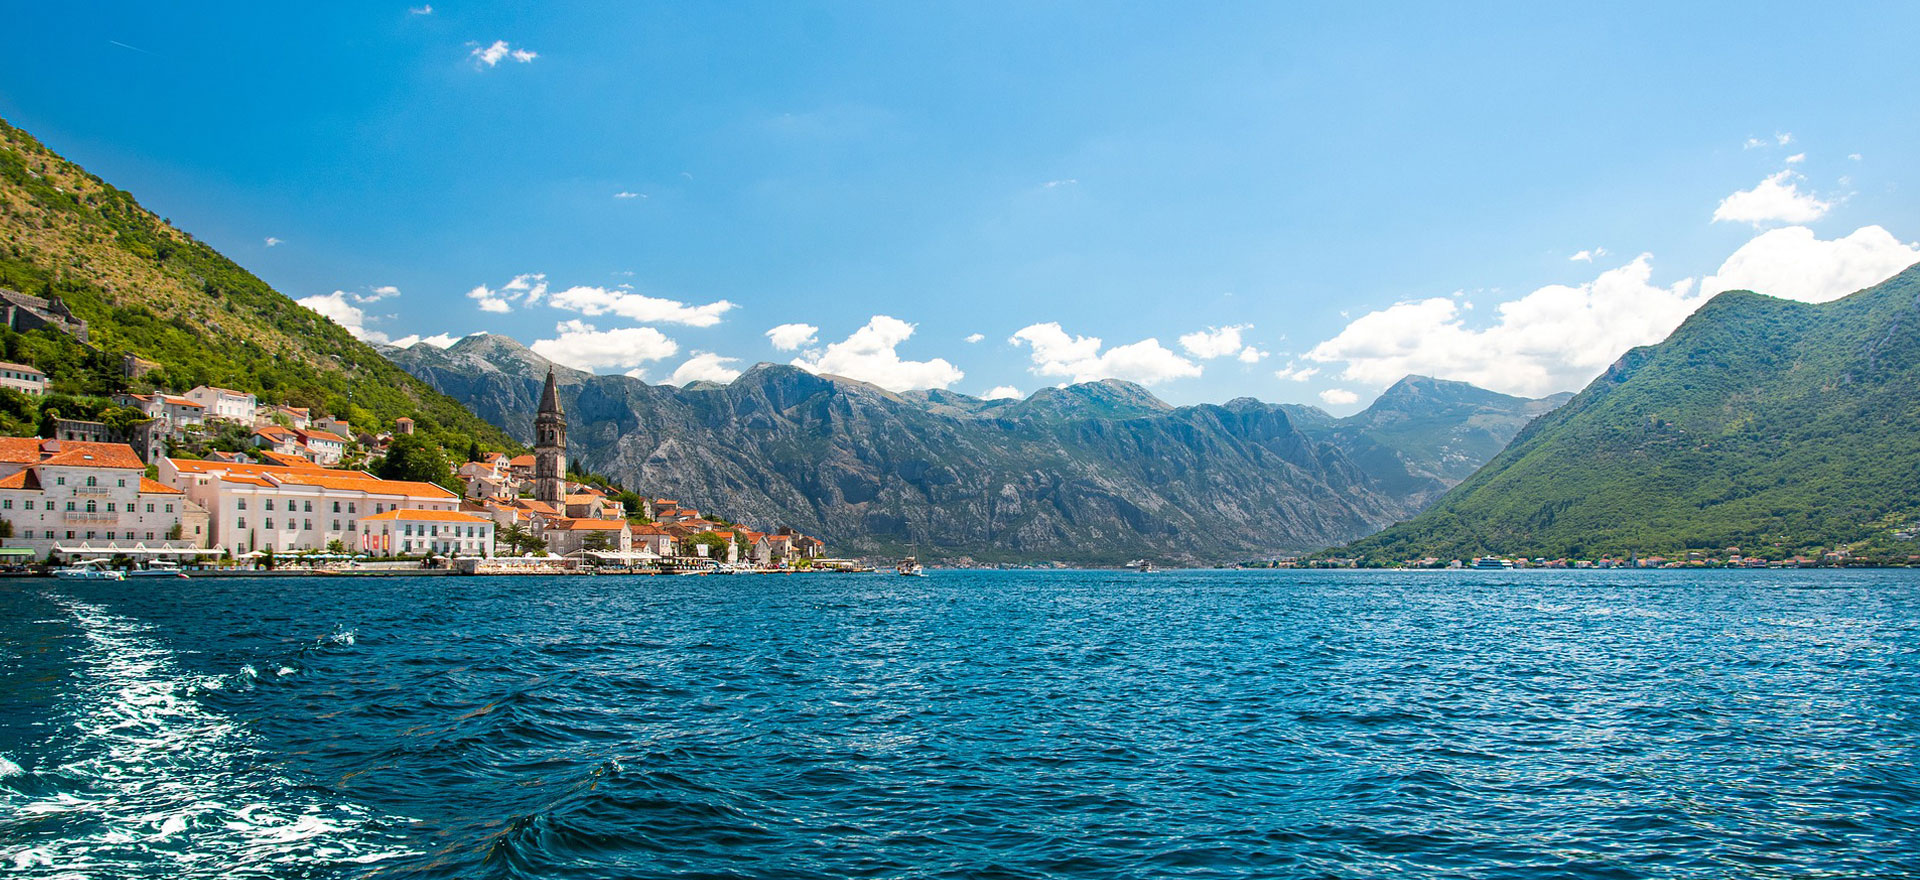 View of Kotor from the sea - Montenegro holidays